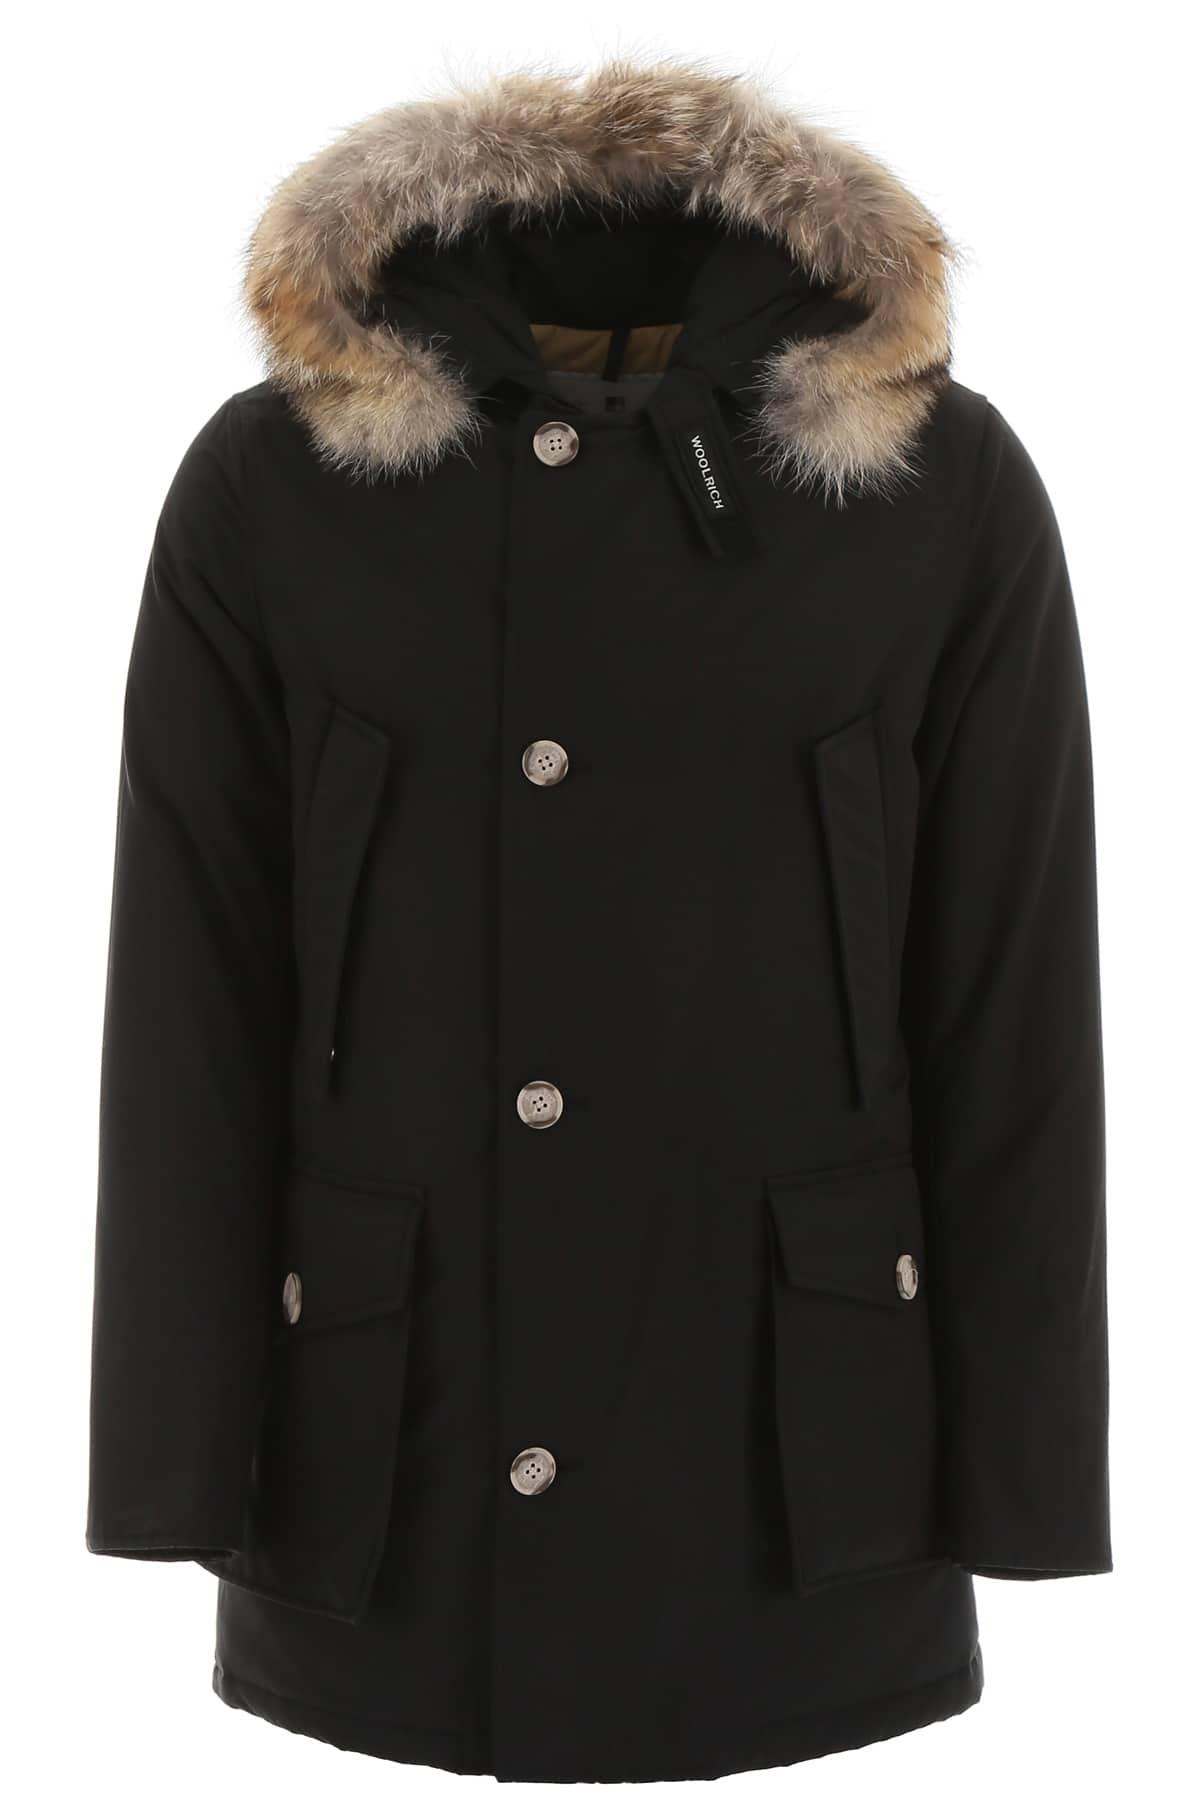 Woolrich Arctic Parka With Coyote Fur in Black for Men - Lyst